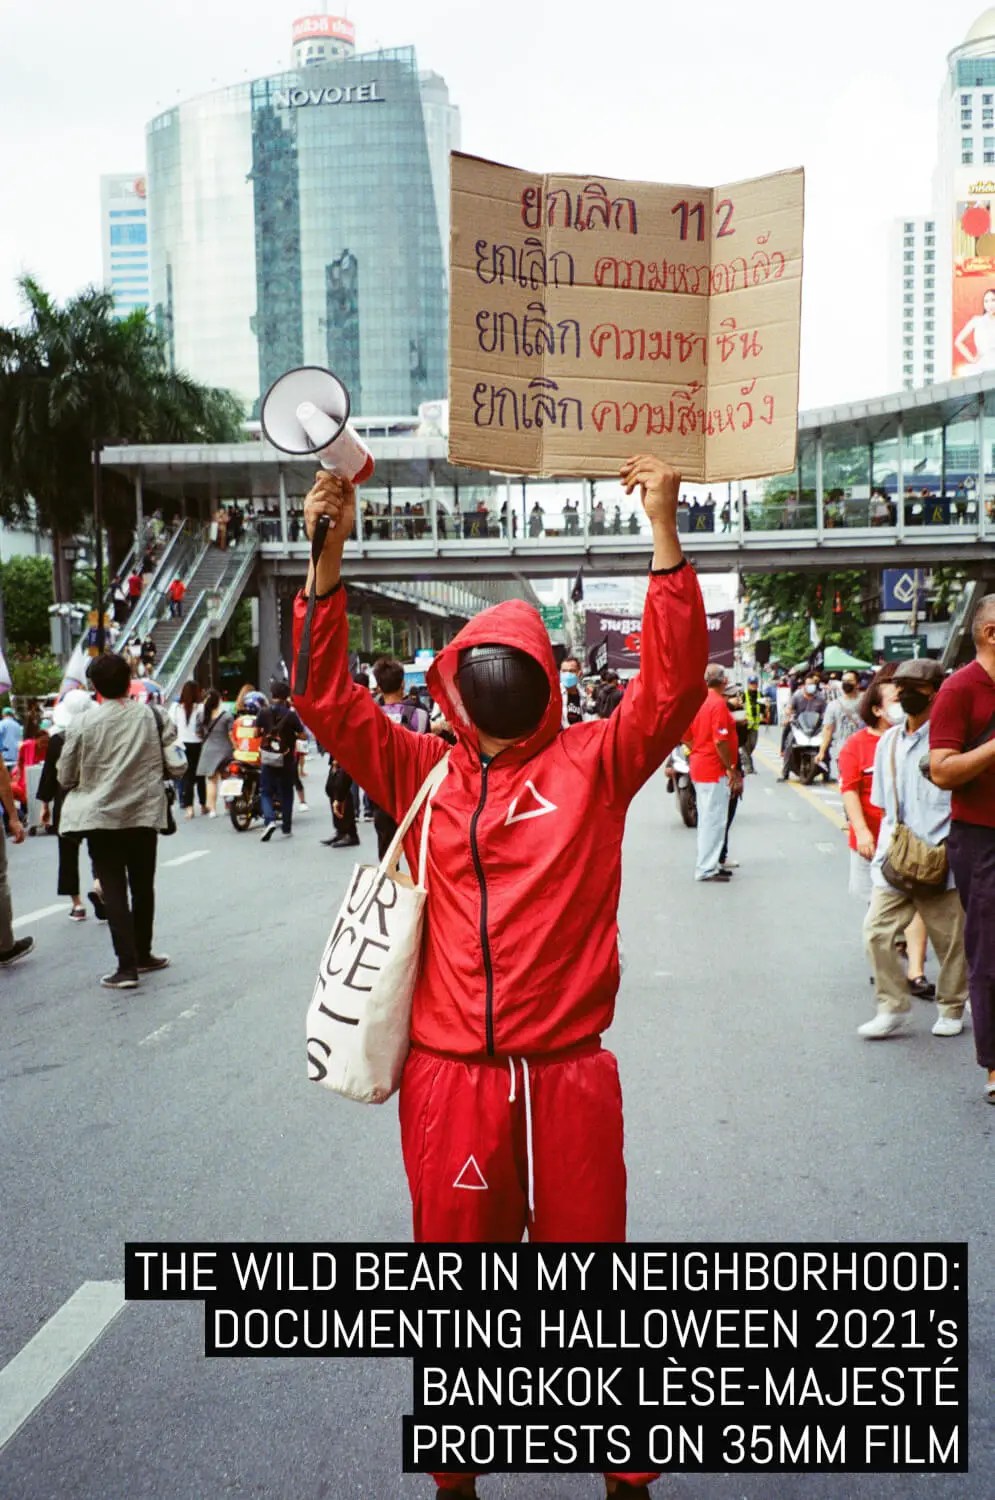 The wild bear in my neighborhood: Documenting Halloween 2021’s Bangkok lèse-majesté protests on 35mm film